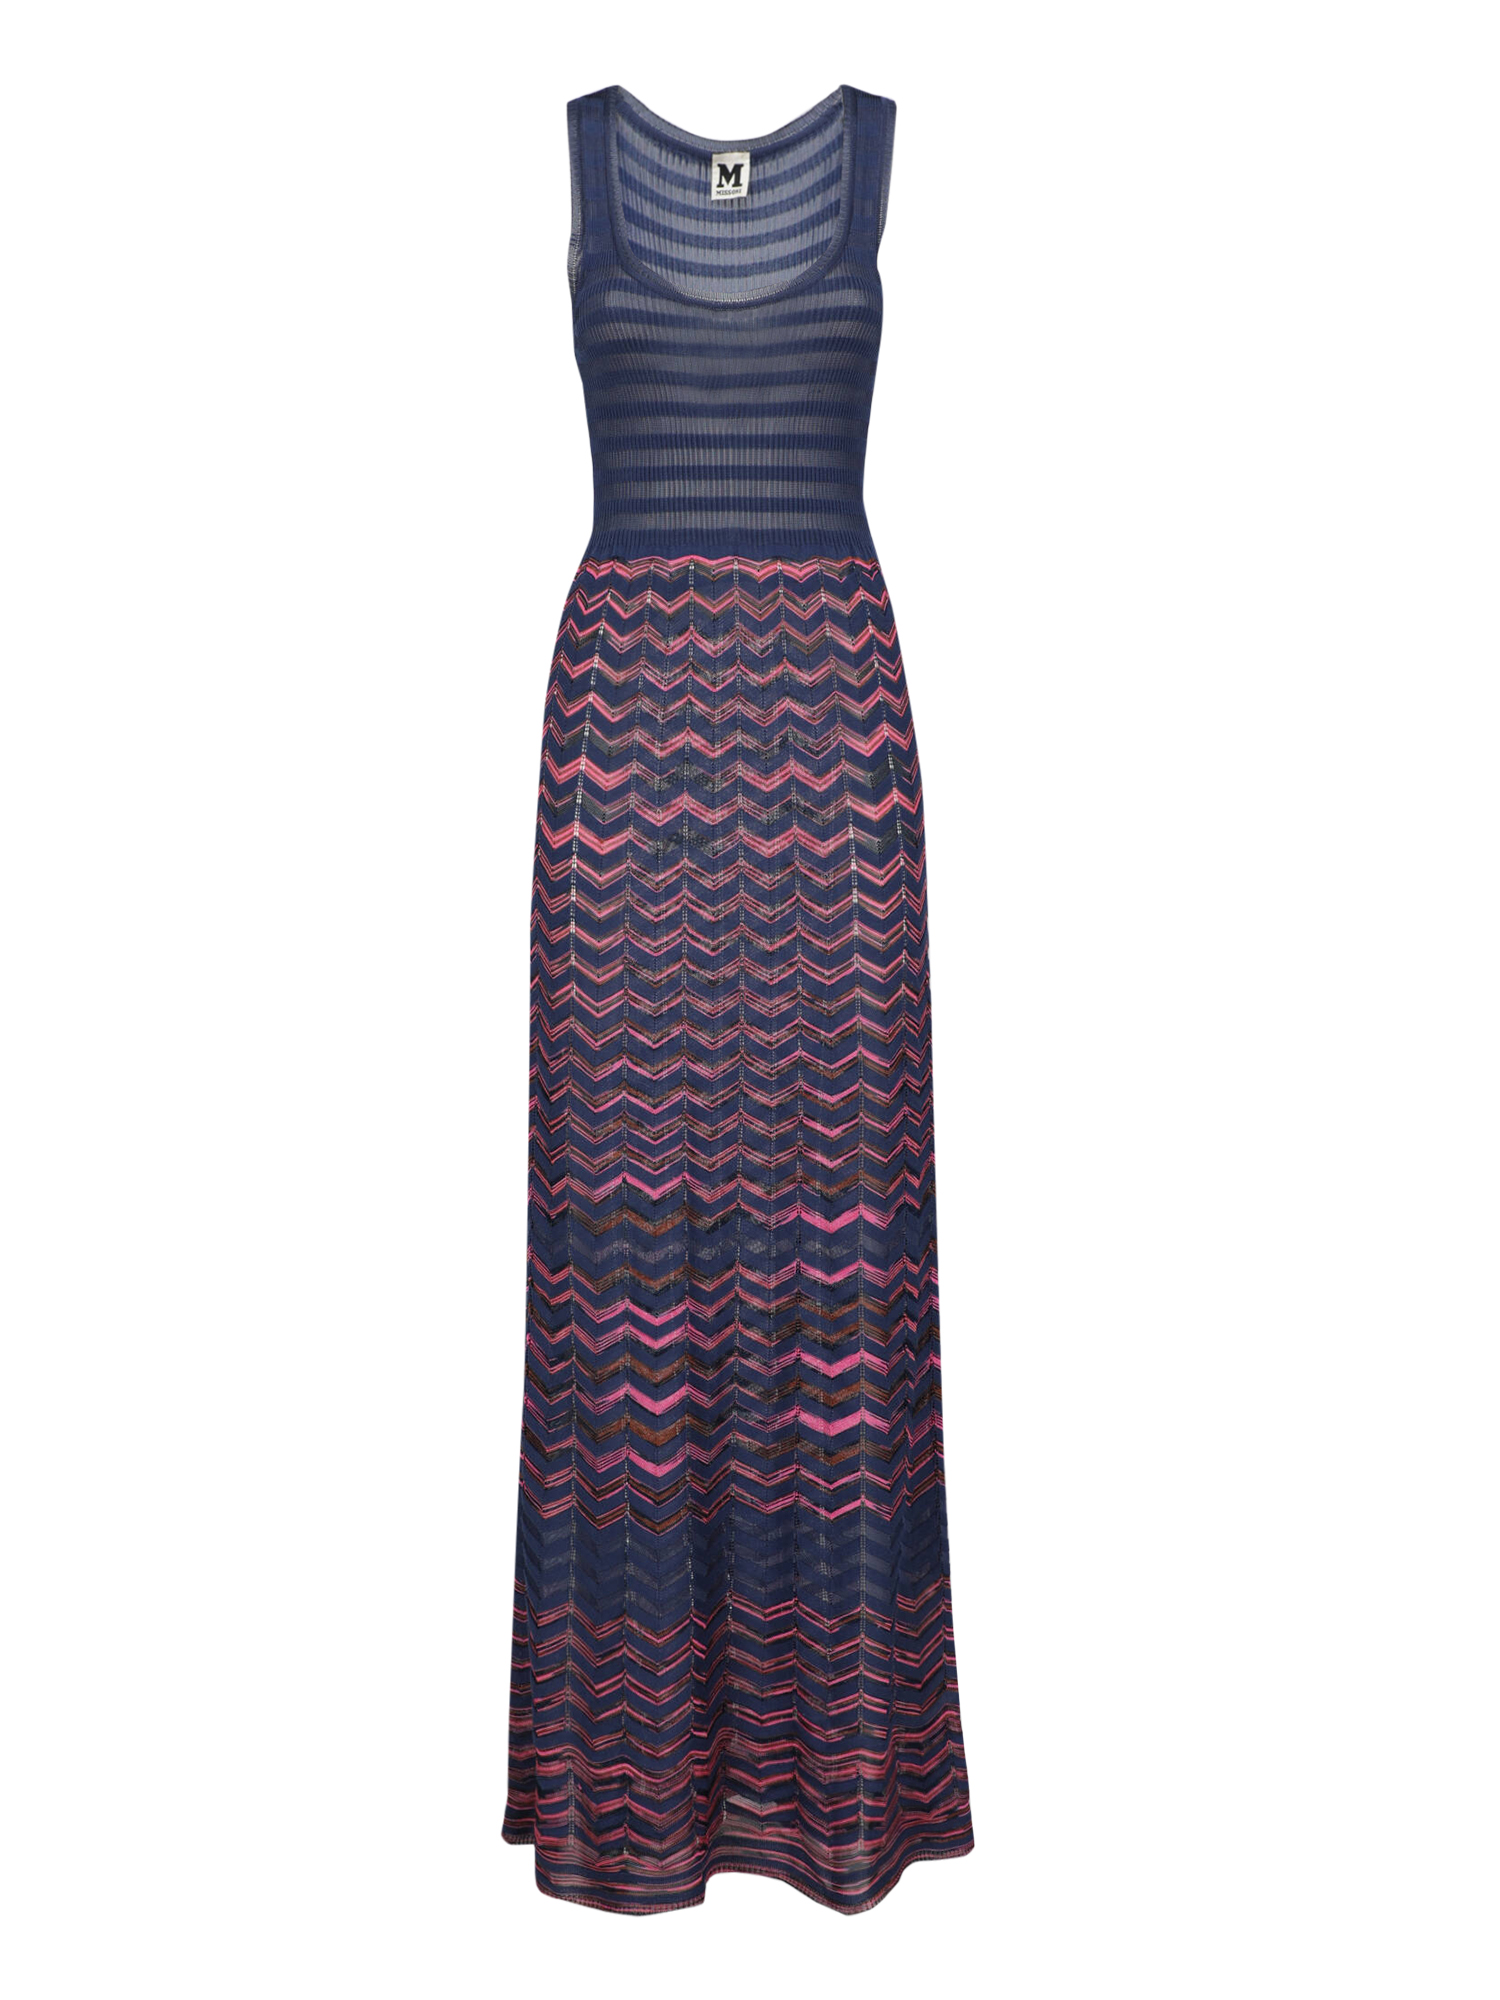 Condition: Good, Other Patterns Synthetic Fibers, Color: Navy, Pink - XS - IT 38 -